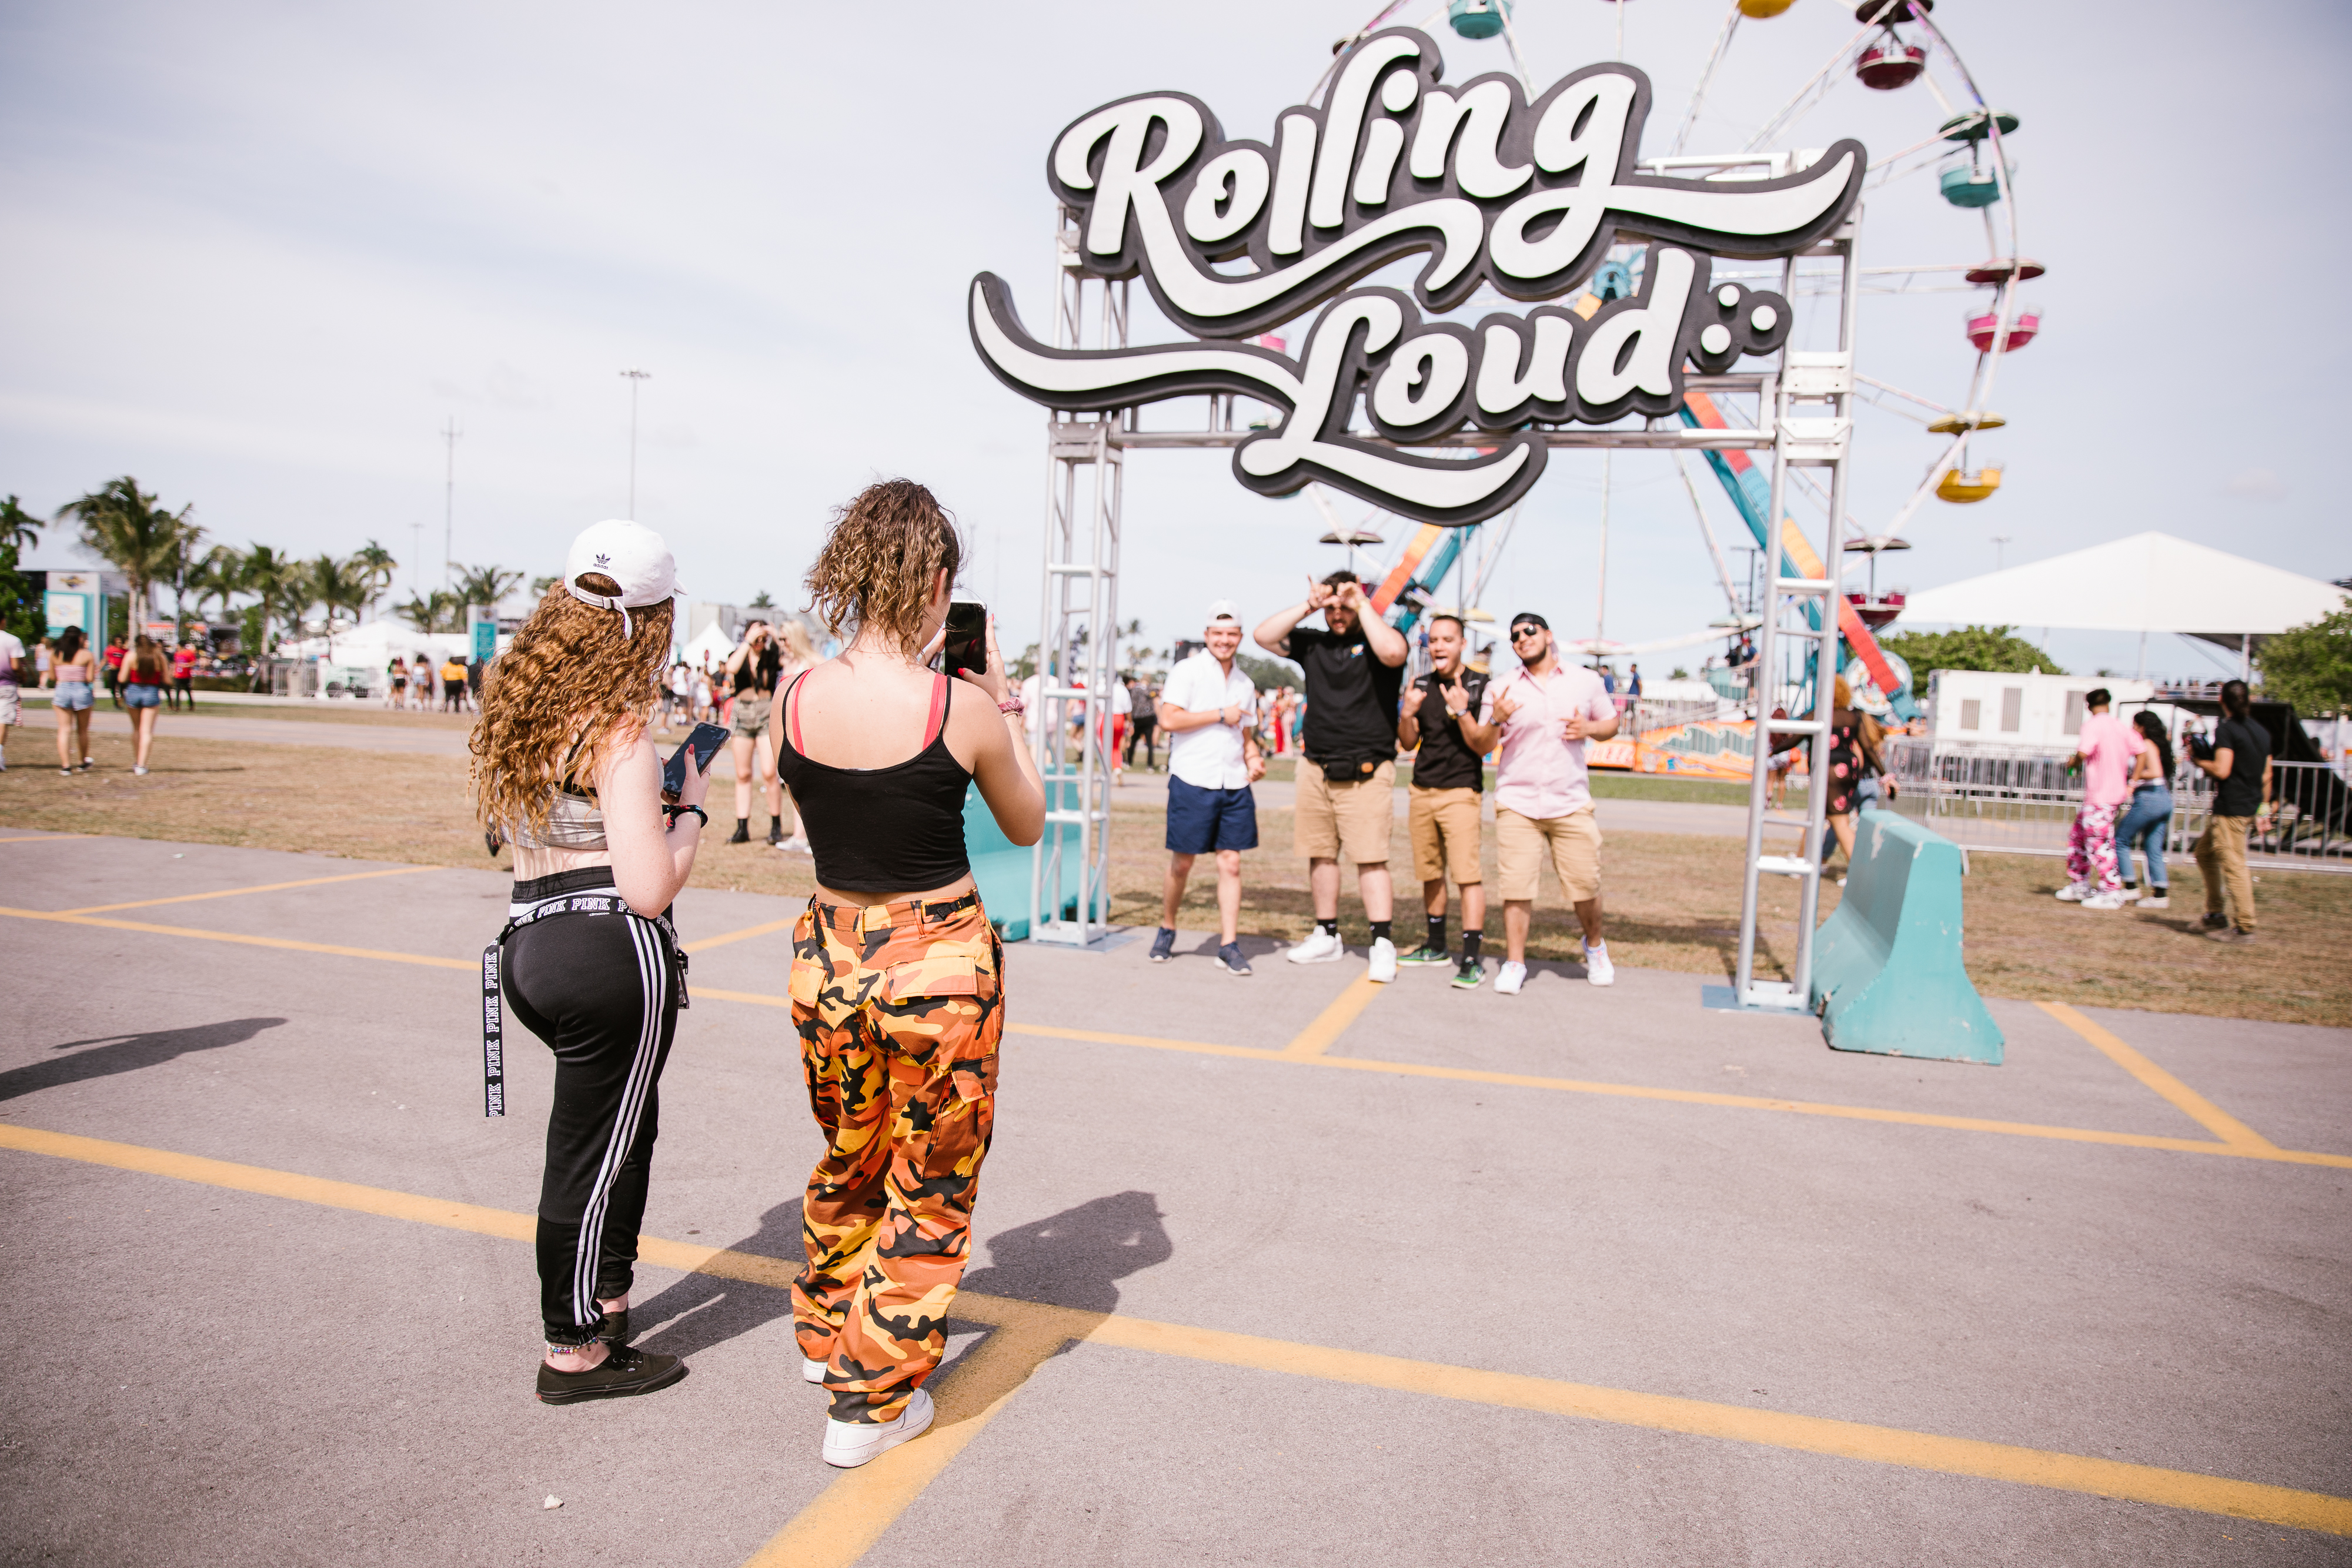 Rolling Loud attendees taking a photo under the festival sign.